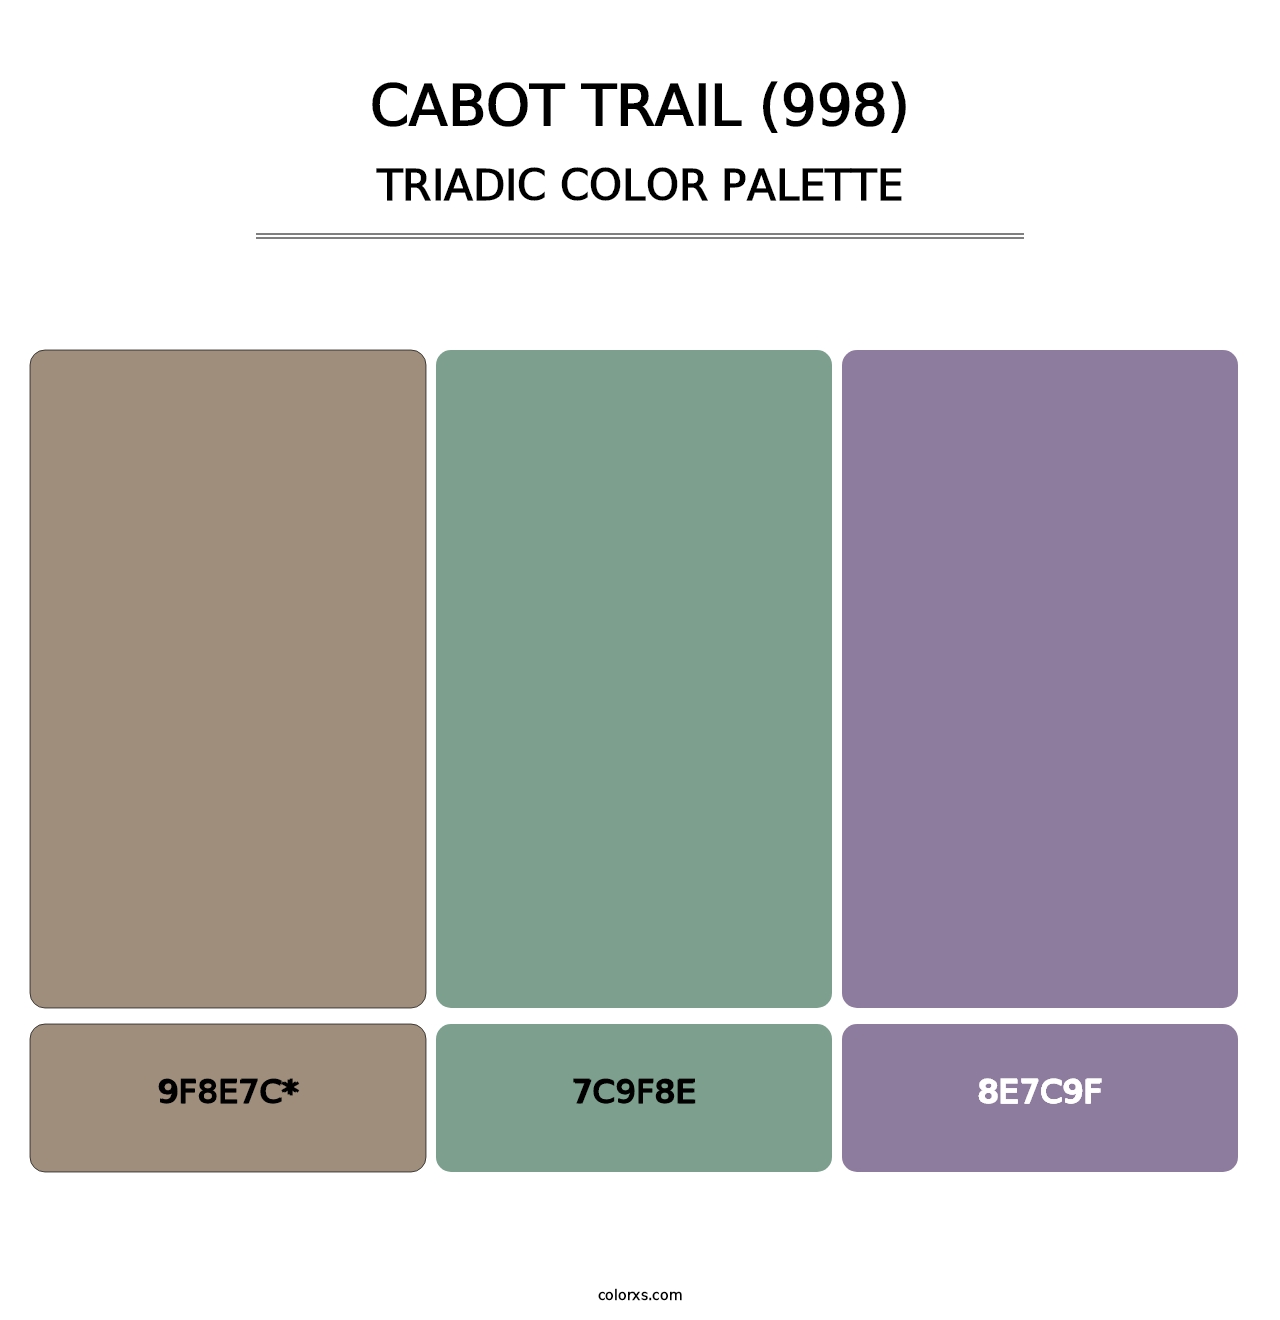 Cabot Trail (998) - Triadic Color Palette